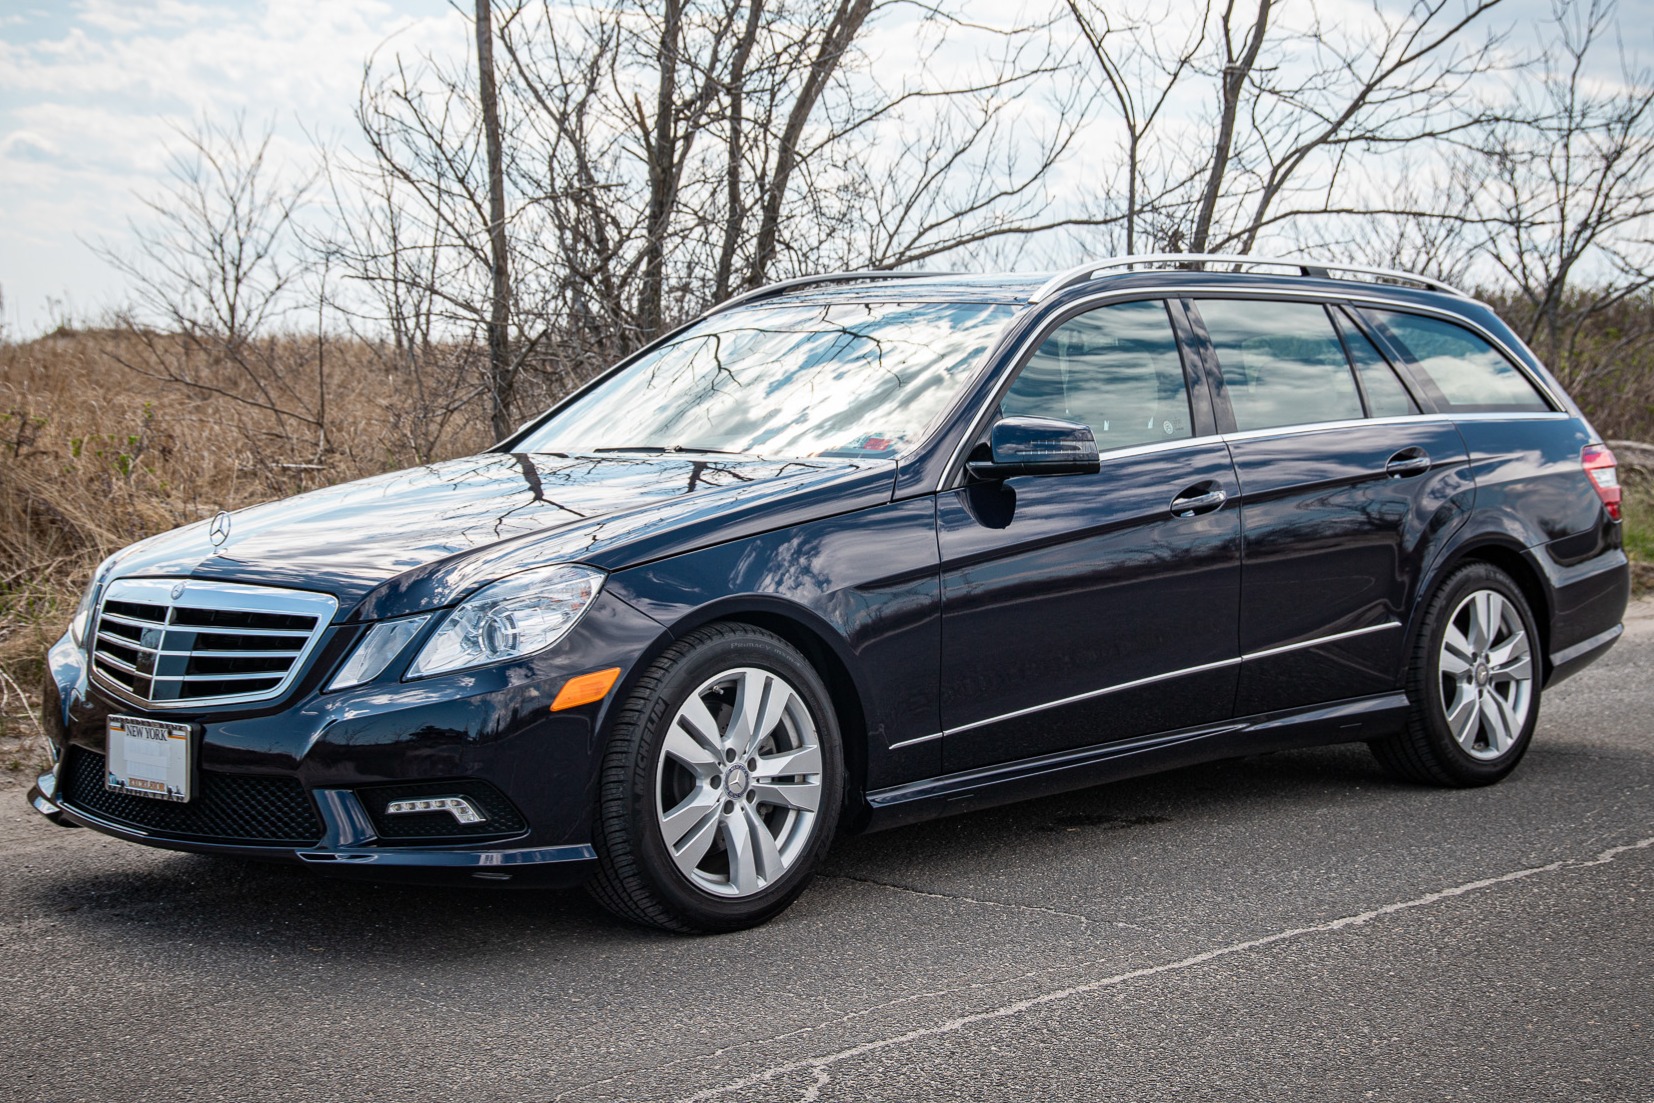 Used 41k-Mile 2011 Mercedes-Benz E350 4MATIC Wagon Review